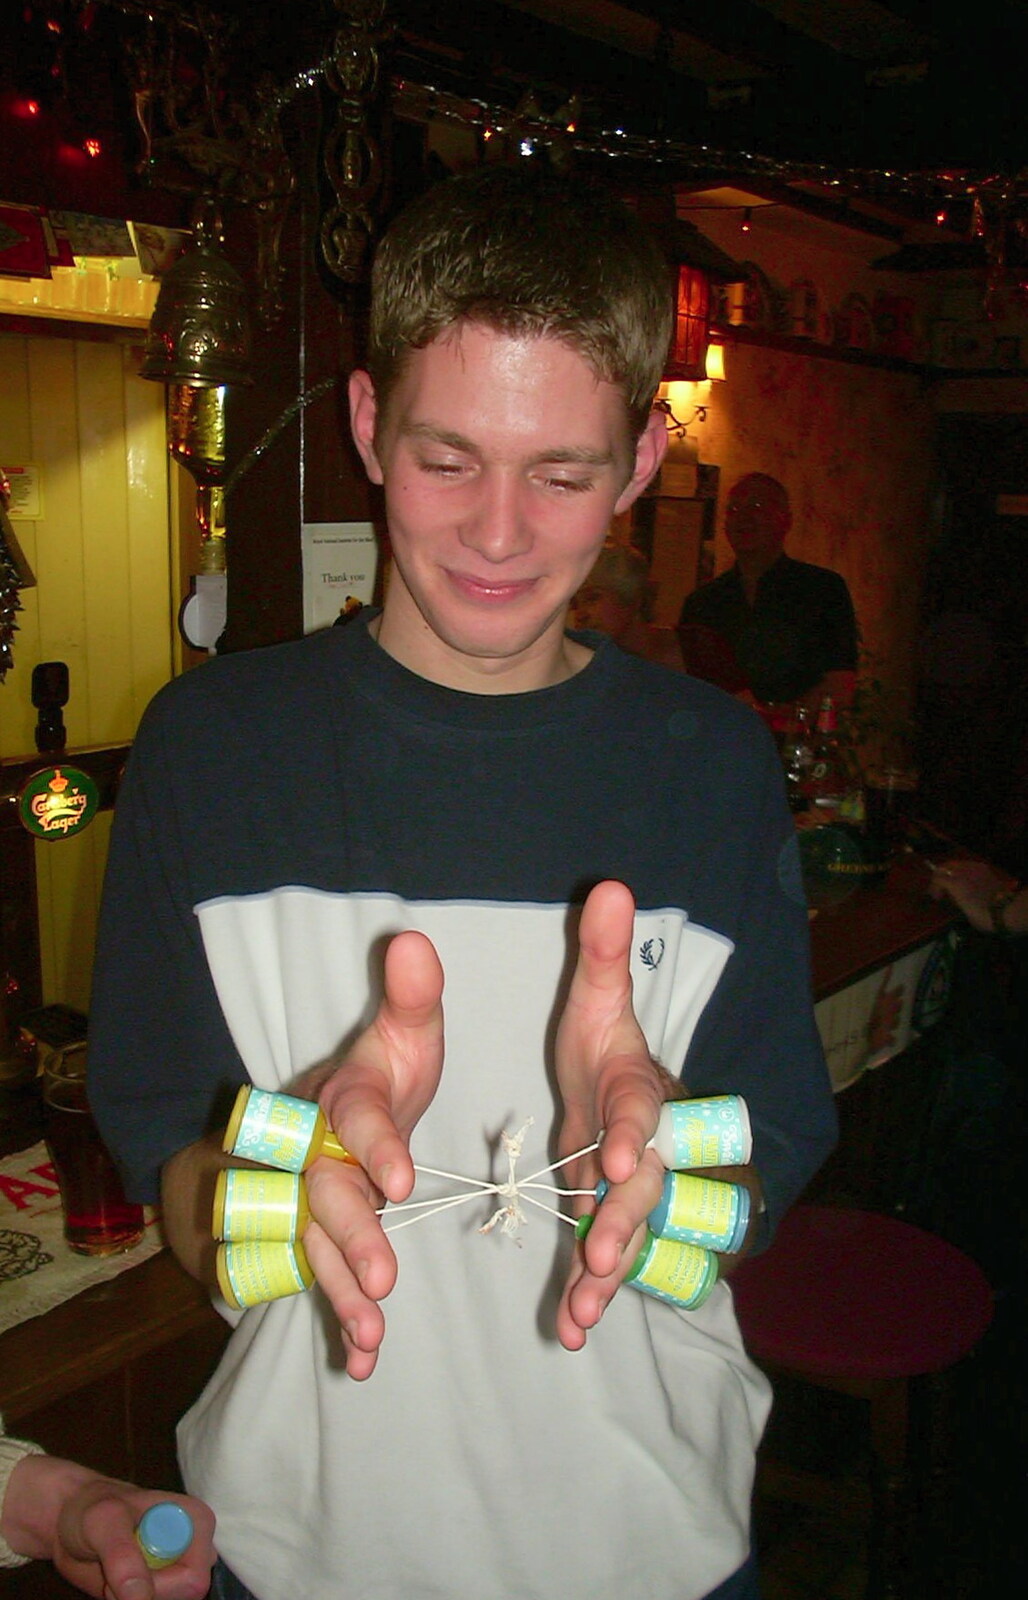 New Year's Eve at the Swan Inn, Brome, Suffolk - 31st December 2002: The Boy Phil makes a six-way party popper